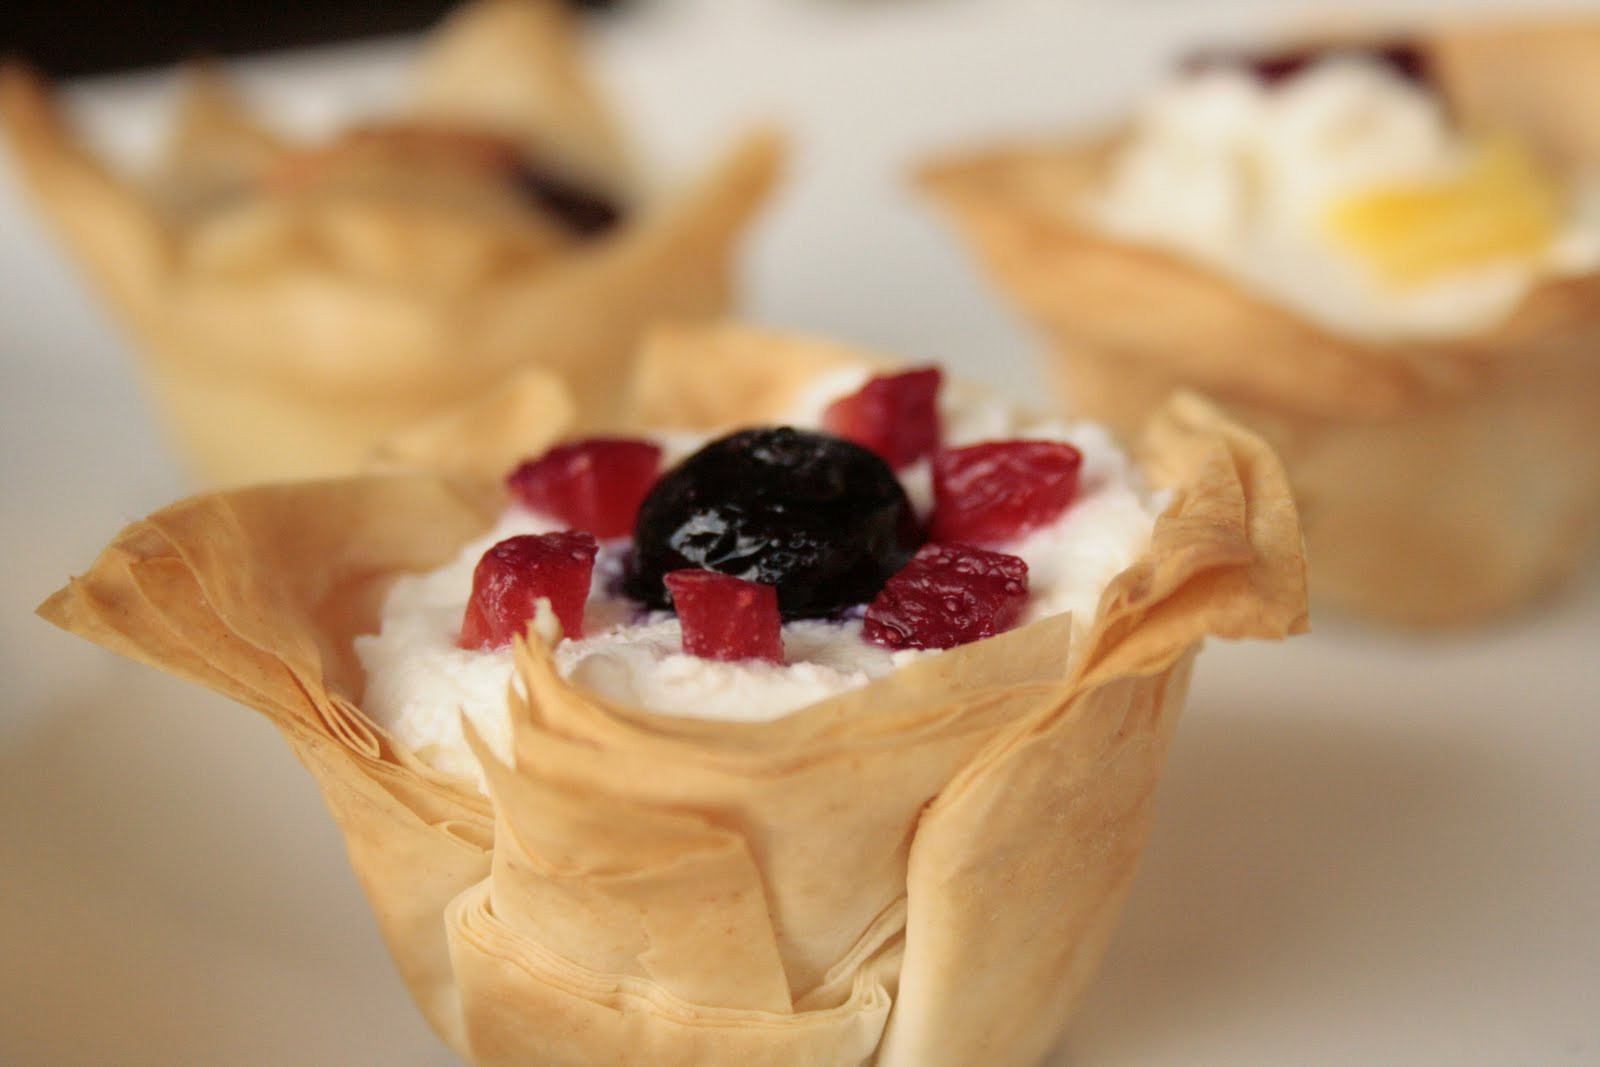 Phyllo Dough Desserts Recipes
 Salt Pepper Chili Phyllo Cup Desserts A Gourmet Finger Food